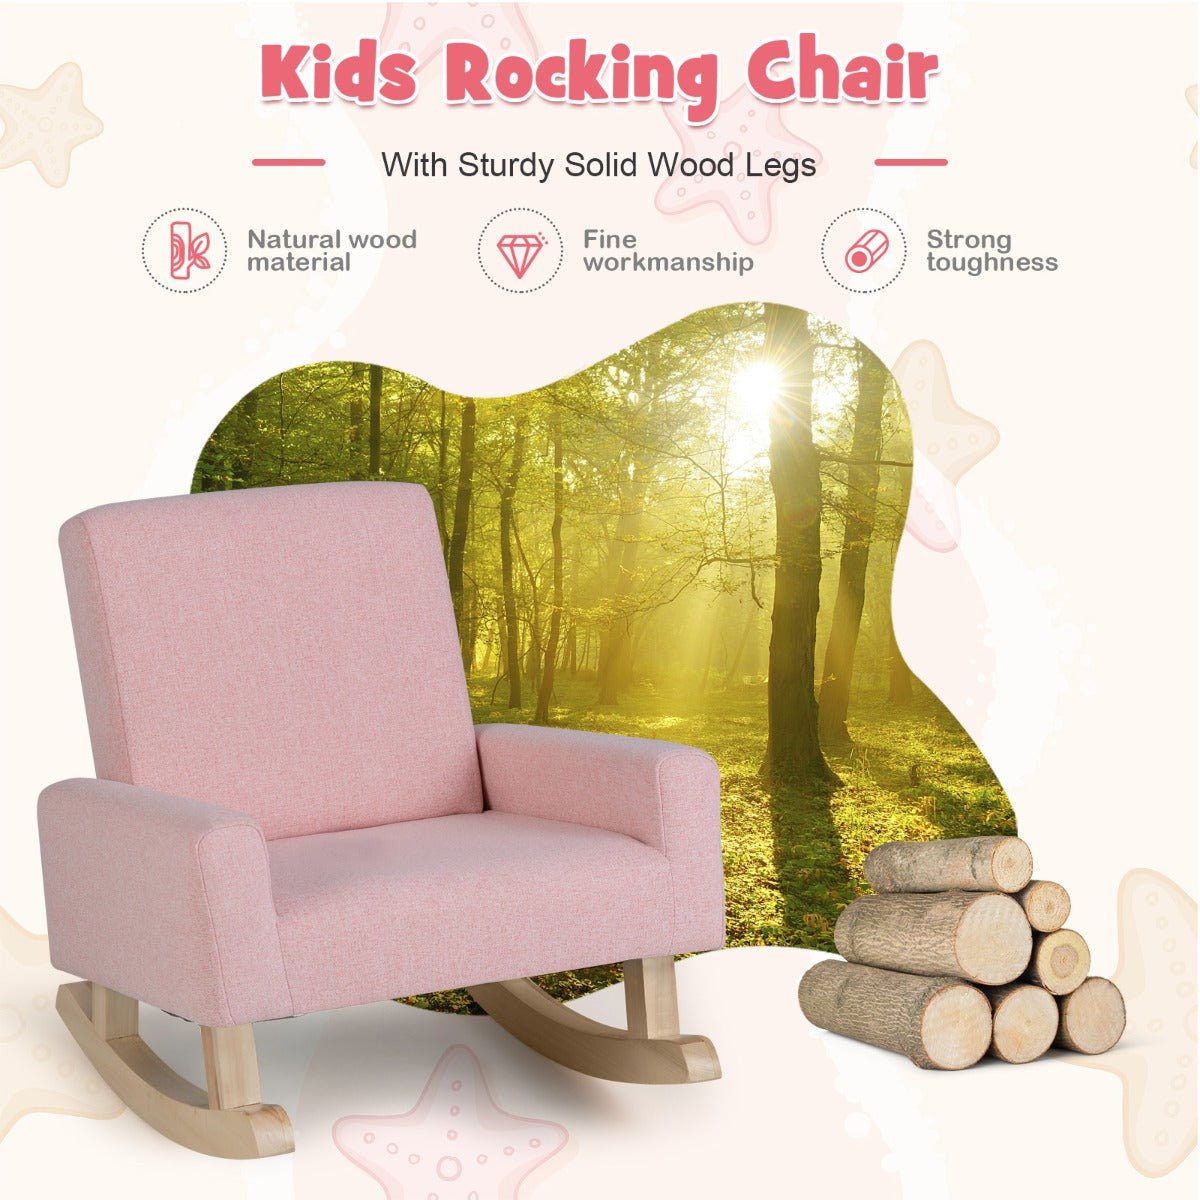 Pink Kids Rocker Chair - Sturdy Wood Legs, Anti-tipping Design for Playful Comfort